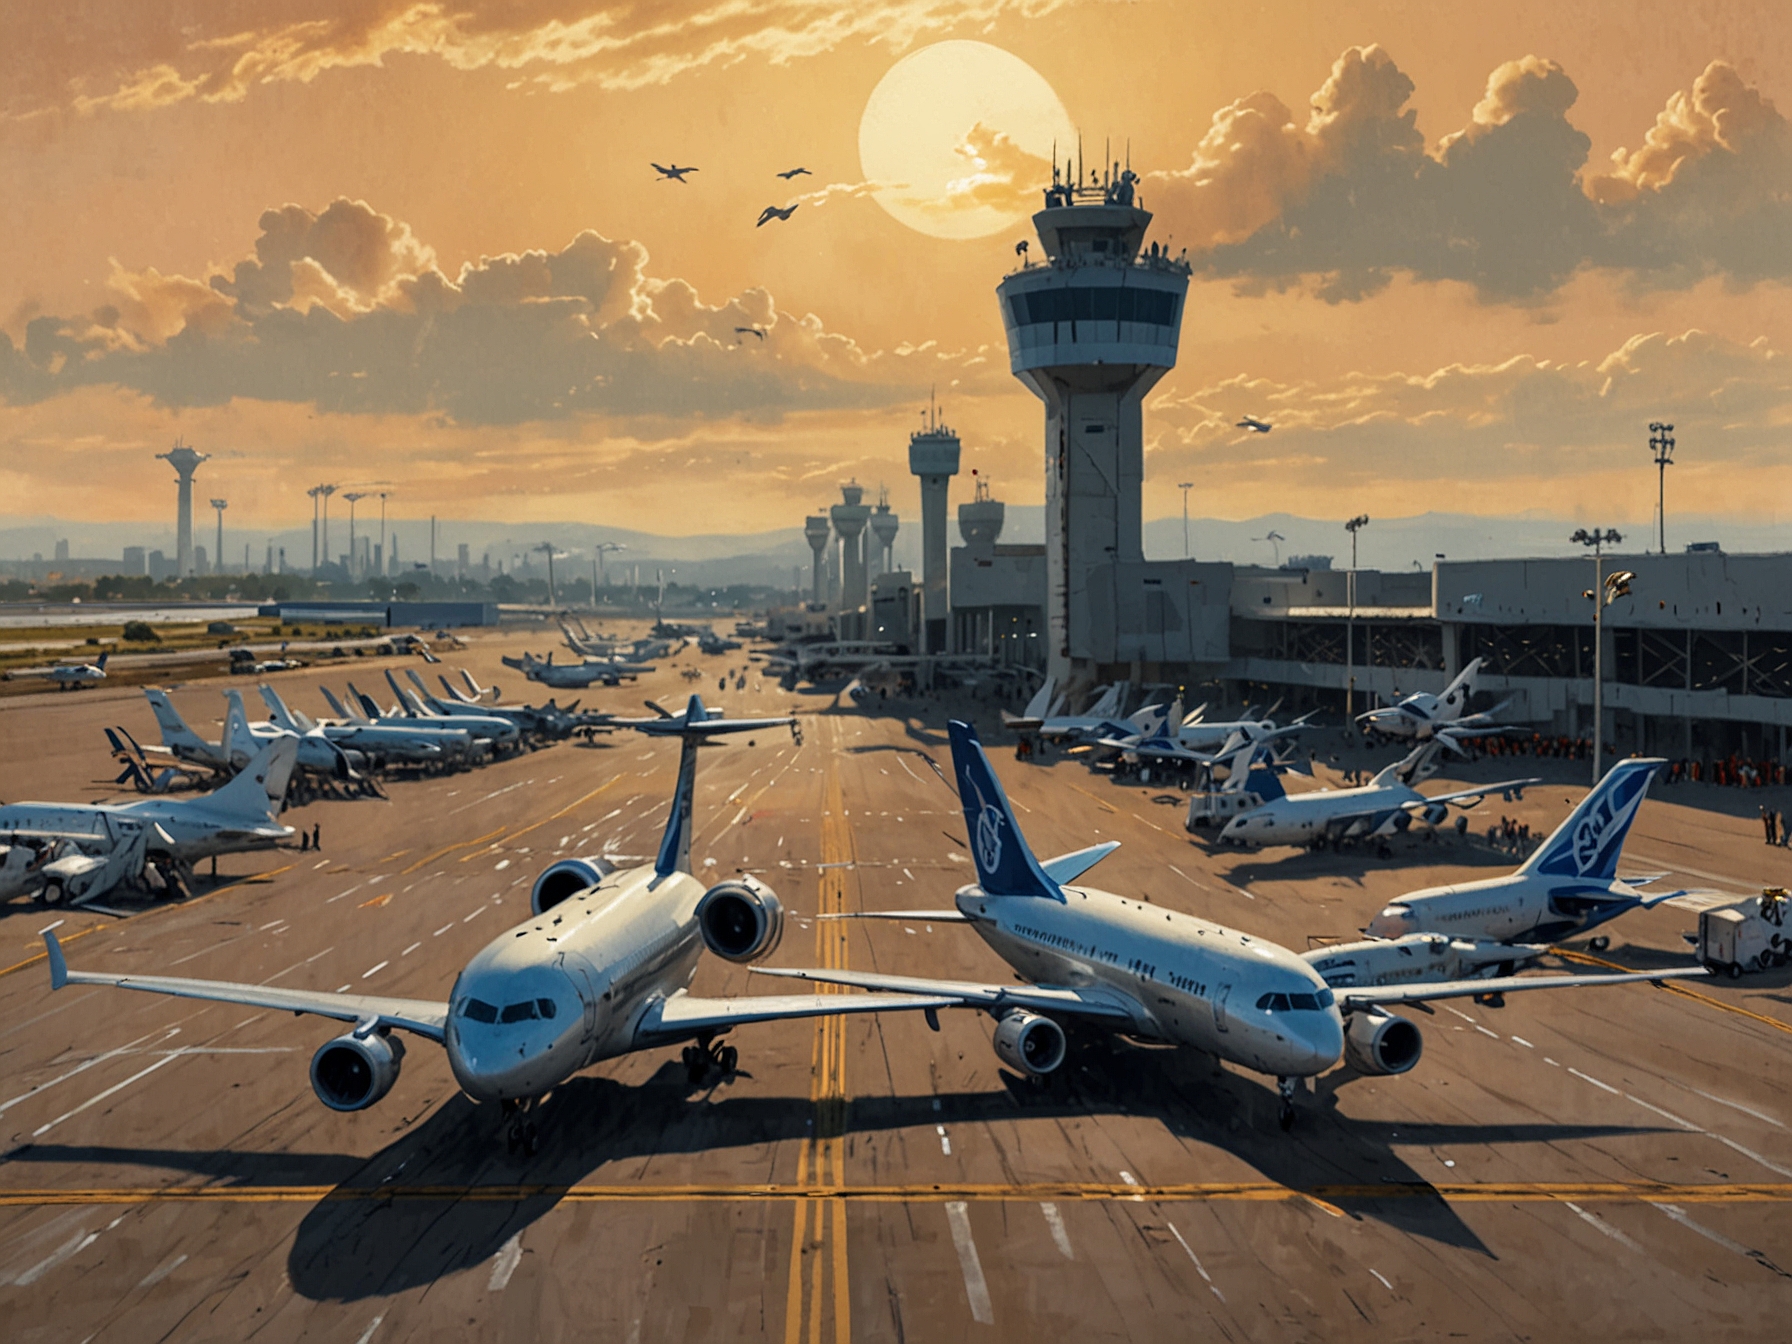 A busy airport runway with multiple aircraft, highlighting the rising demand for air travel and cargo transport, which is a key growth driver for GE Aerospace's future prospects.